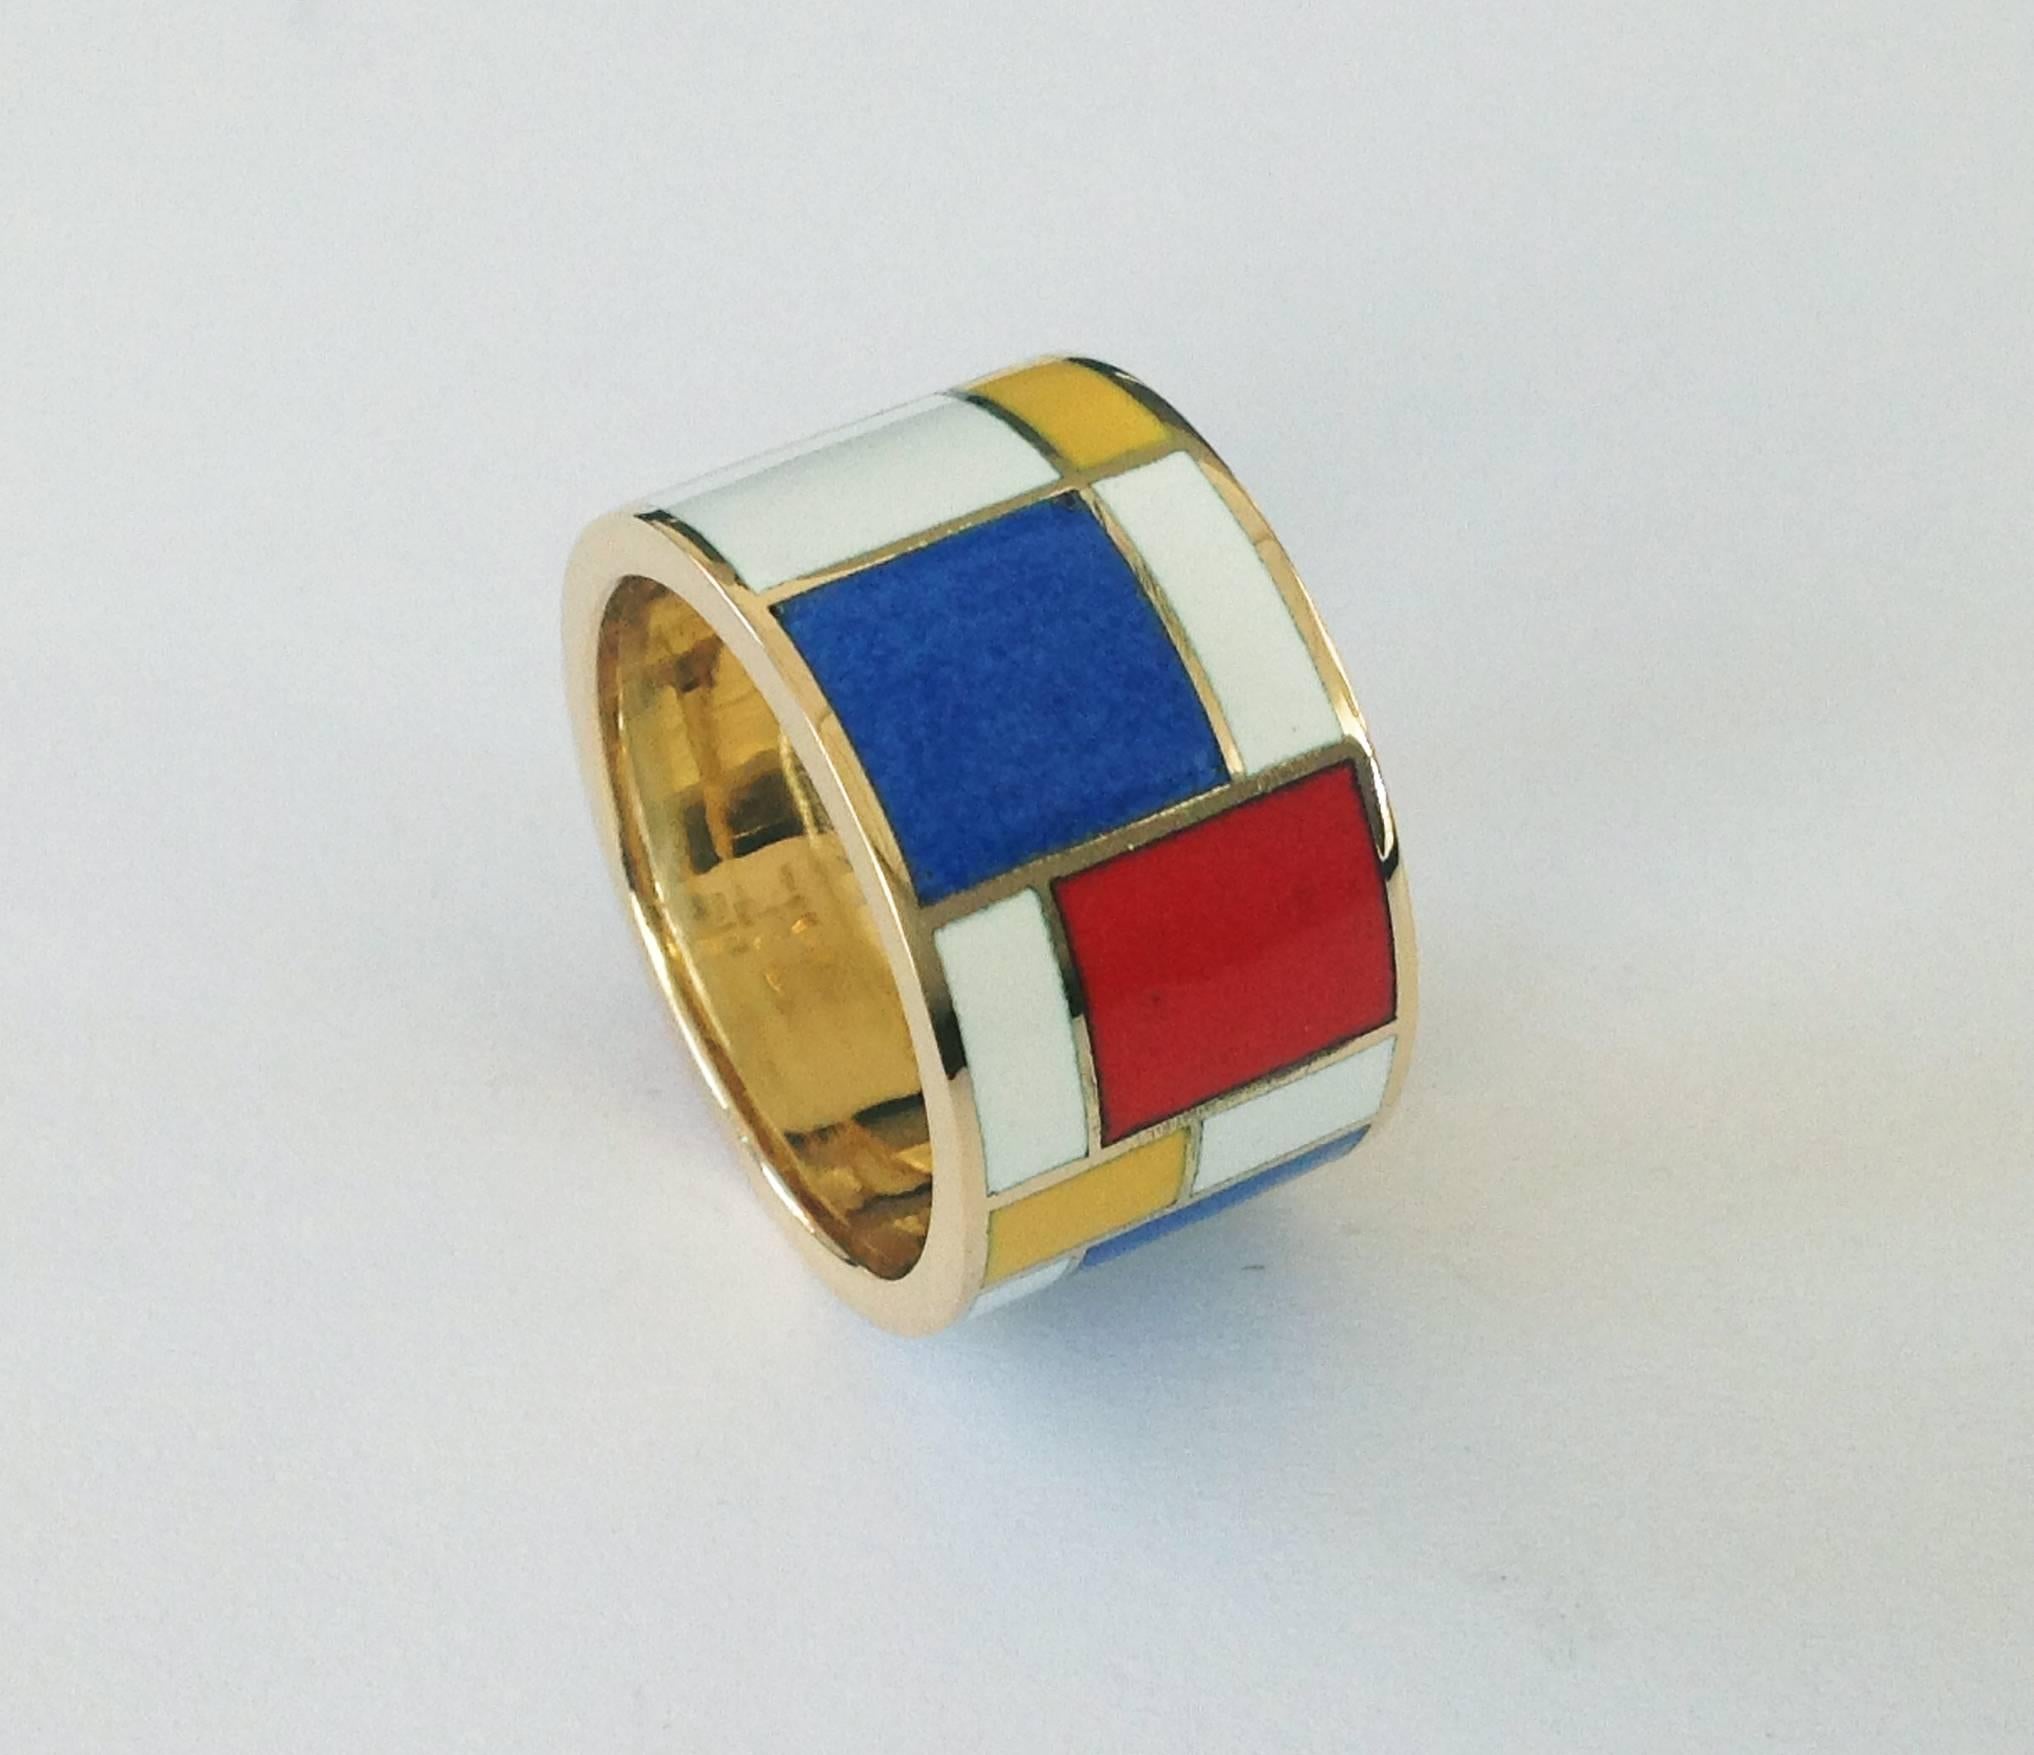 Dalben design fire Enamel and 18 k yellow gold unisex band ring inspired by Mondrian paintings.
Height 0,47 inch (12 mm), ring size 7 1/4 USA 55 EU .
For other size the ring requires four week from order to be custom-made size.
The ring is